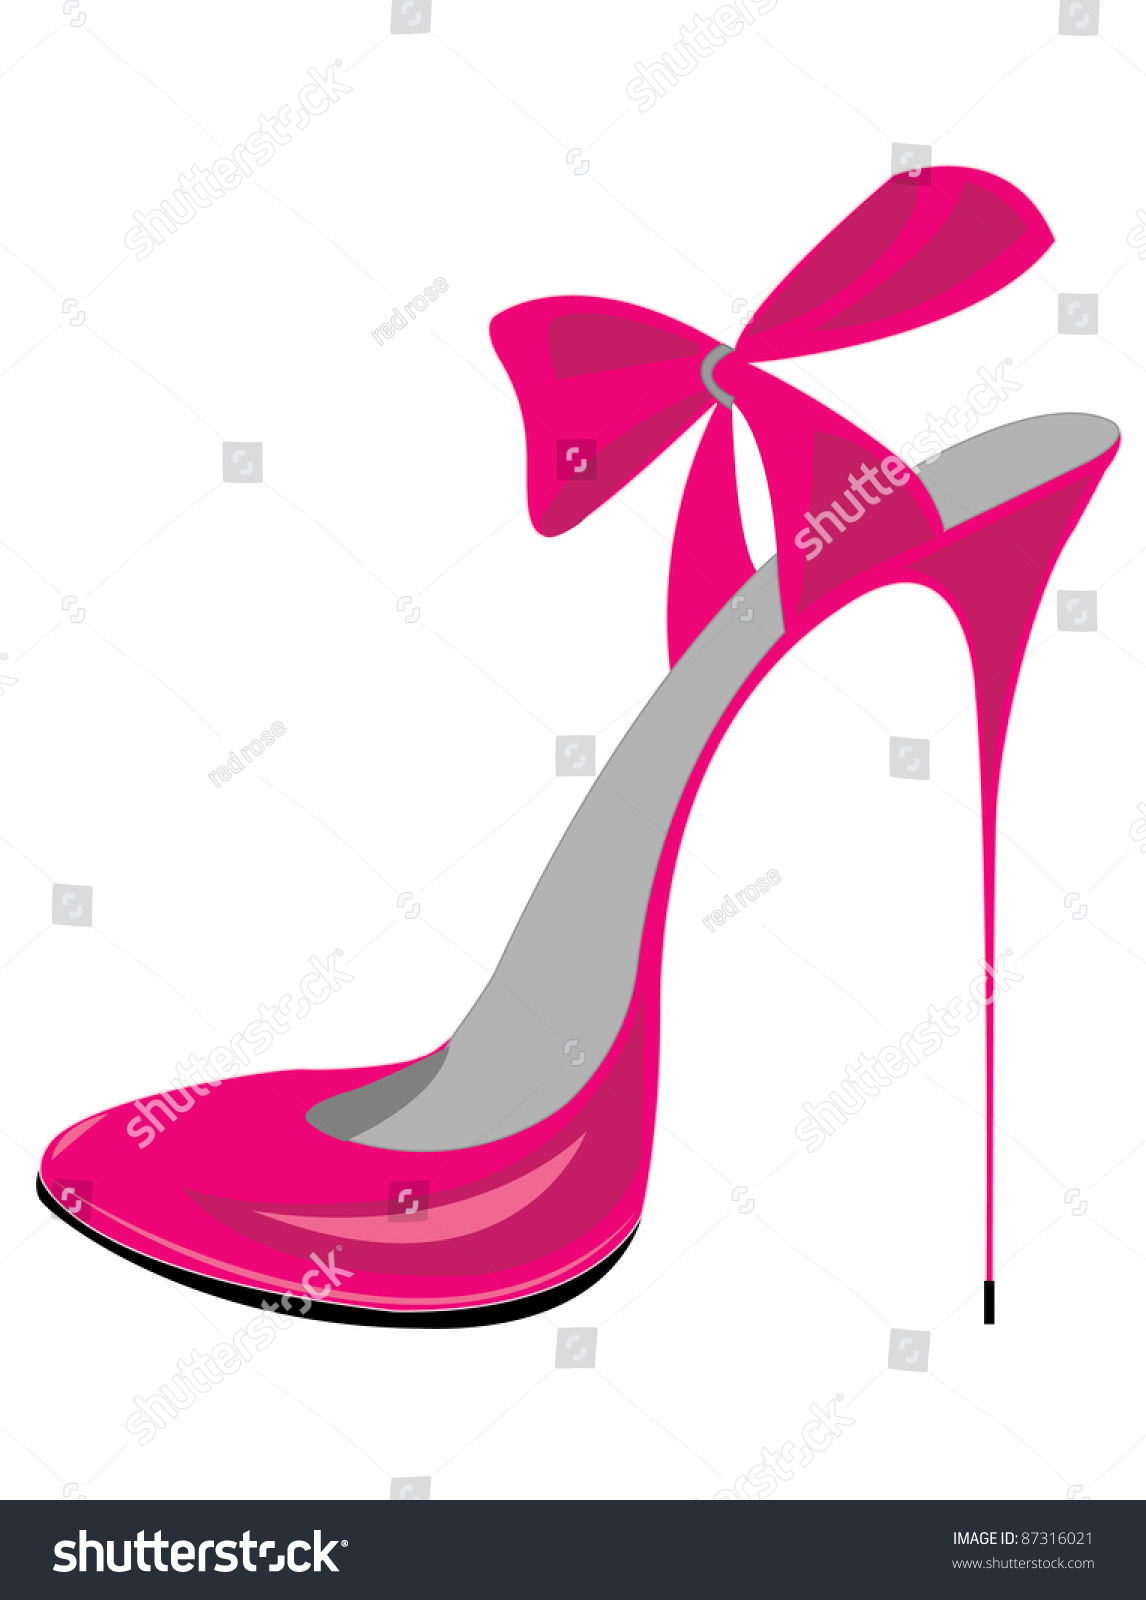 Shoes Stock Vector (Royalty Free) 87316021 - Shutterstock